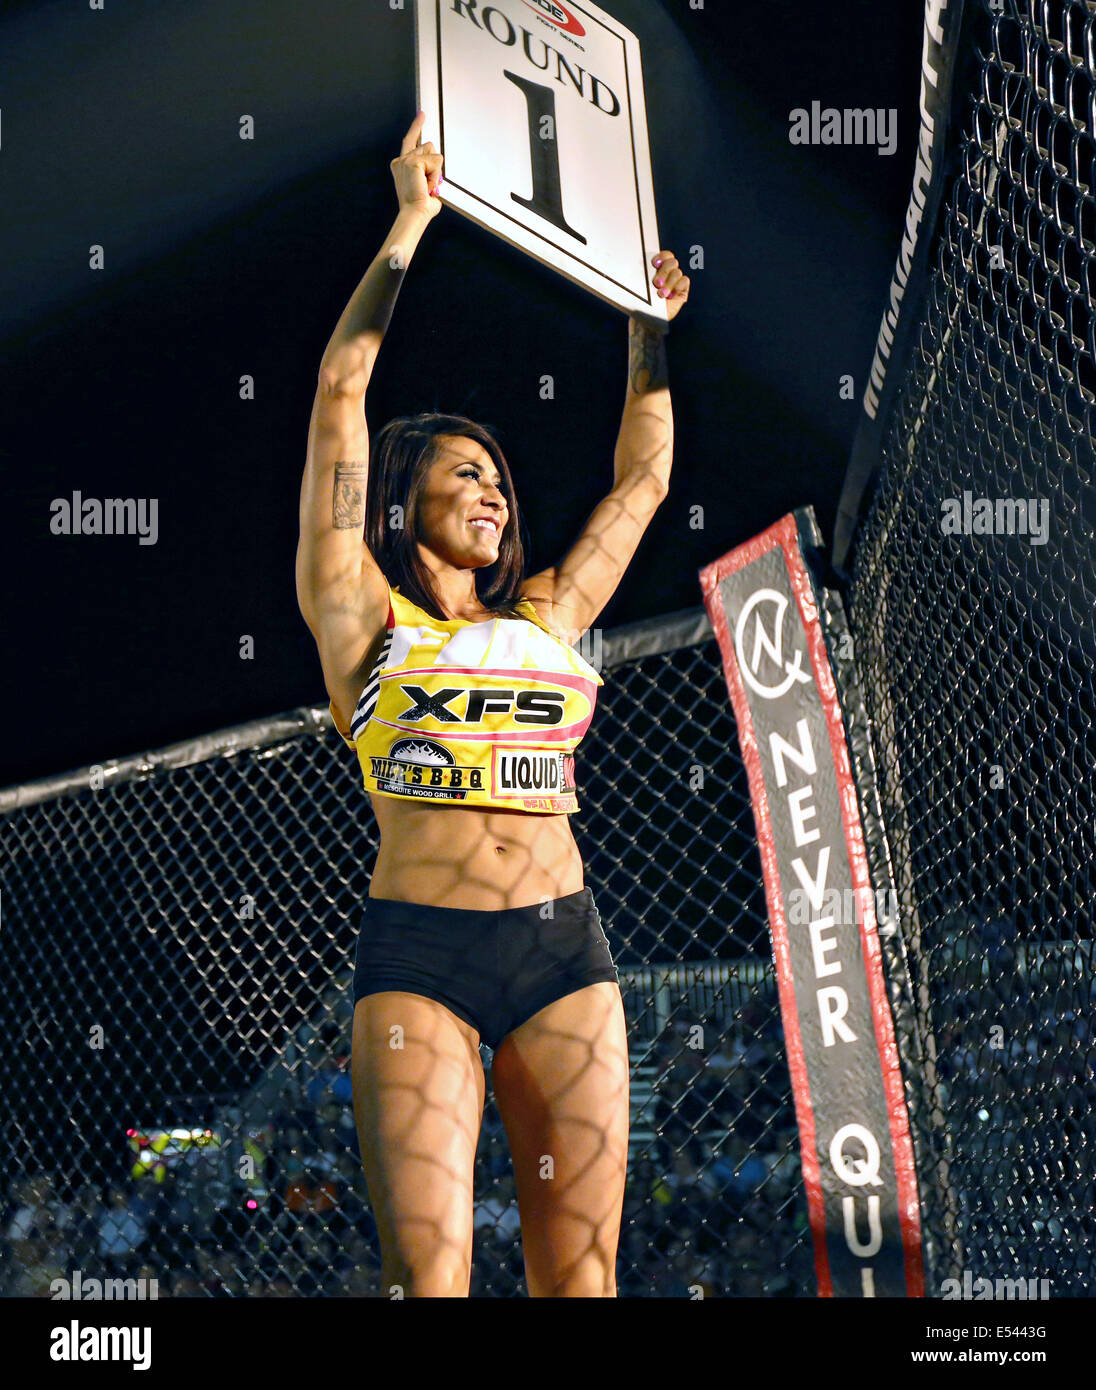 Cage Fighting ring girl Taniah marks the first round start of a fight round during Summer Fight Night Mixed Martial Arts competition at Del Valle Field June 20, 2014 in Twentynine, California. Stock Photo